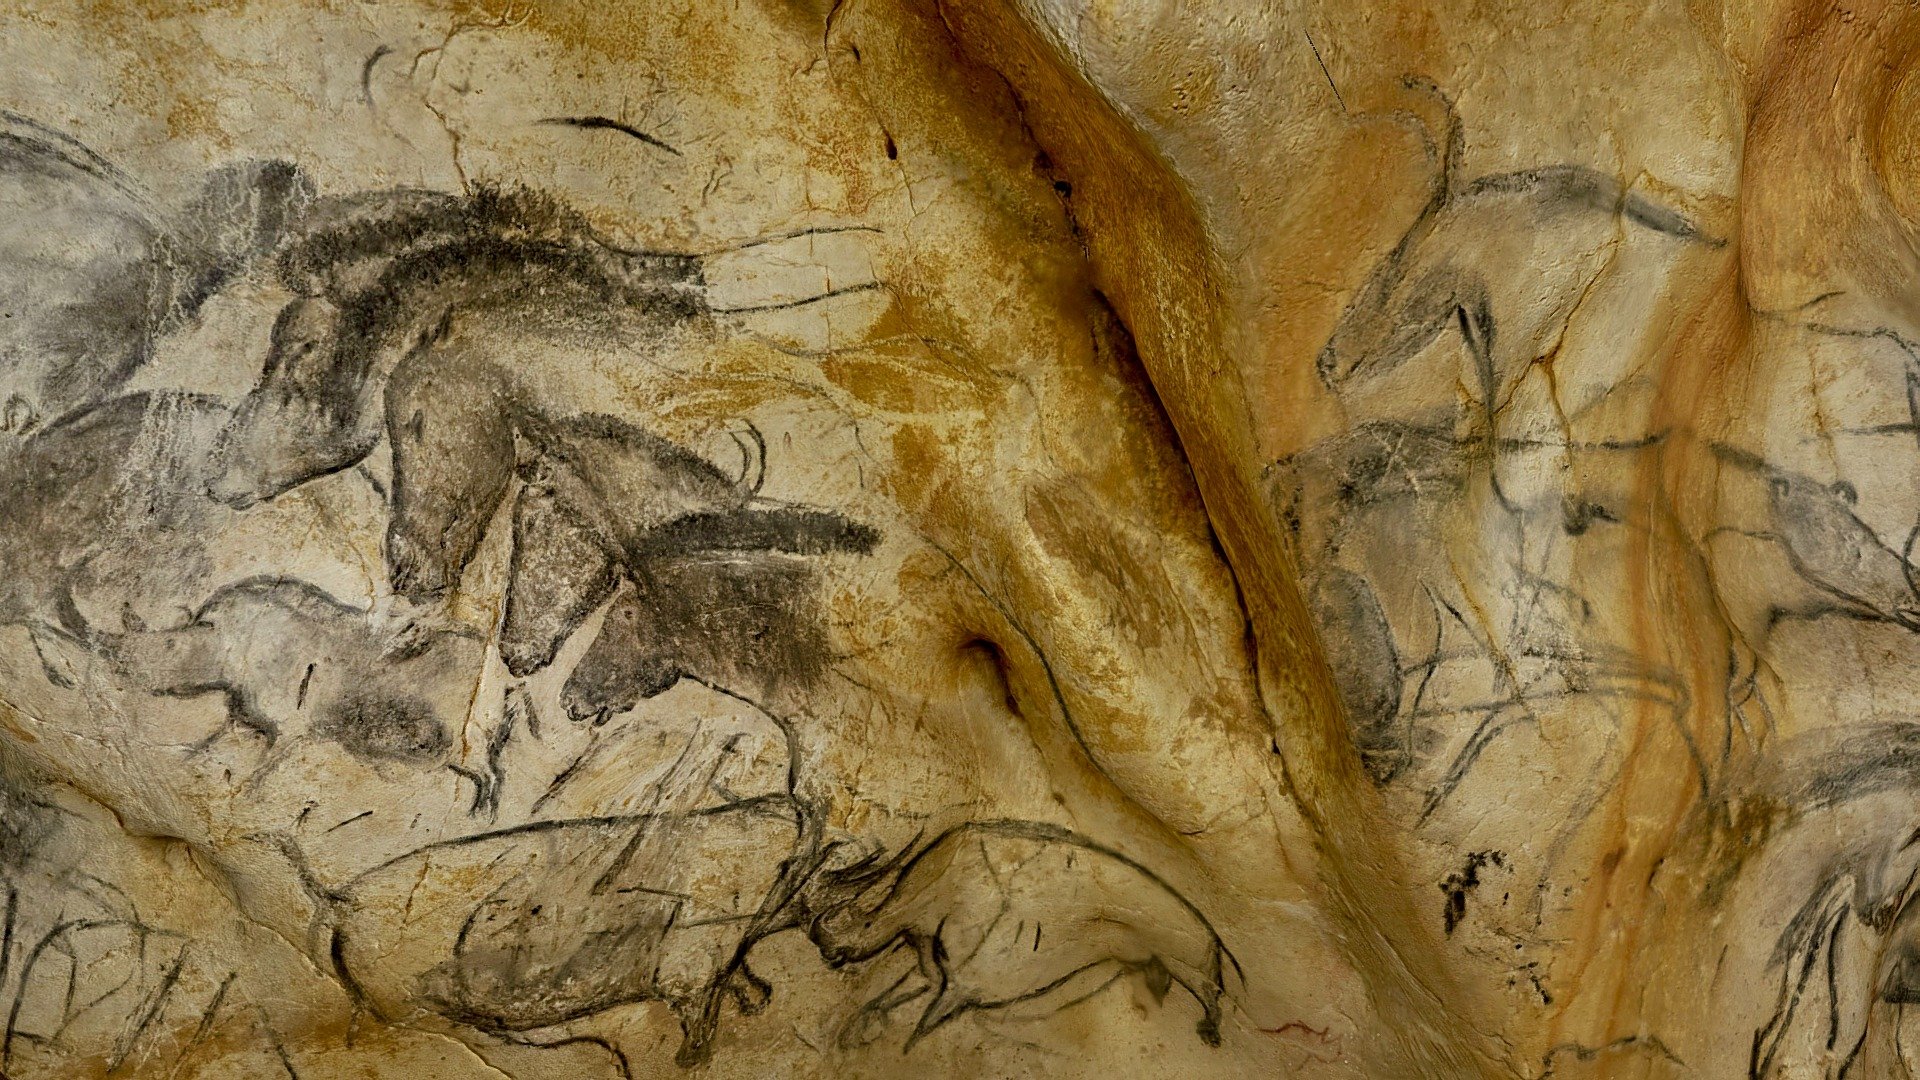 The Panel of the Four Horses contains one of the most evocative works of paleolithic art. Carbon 14 dating of the charcoal in the paintings dates the panel at between 30,000 and 32,000 years BP. The panel is famous for its horses, however, it is a long and sophisticated compostion that uses subtle undulations in the rock wall as part of the compostion.
There is more information about the horse panel here: https://www.ancientartarchive.org/panel-of-the-four-horses-chauvet-in-vr/ - Panel of the Four Horses Chauvet Pont d'Arc - 3D model by Ancient Art Archive (@ancientartarchive) 3d model